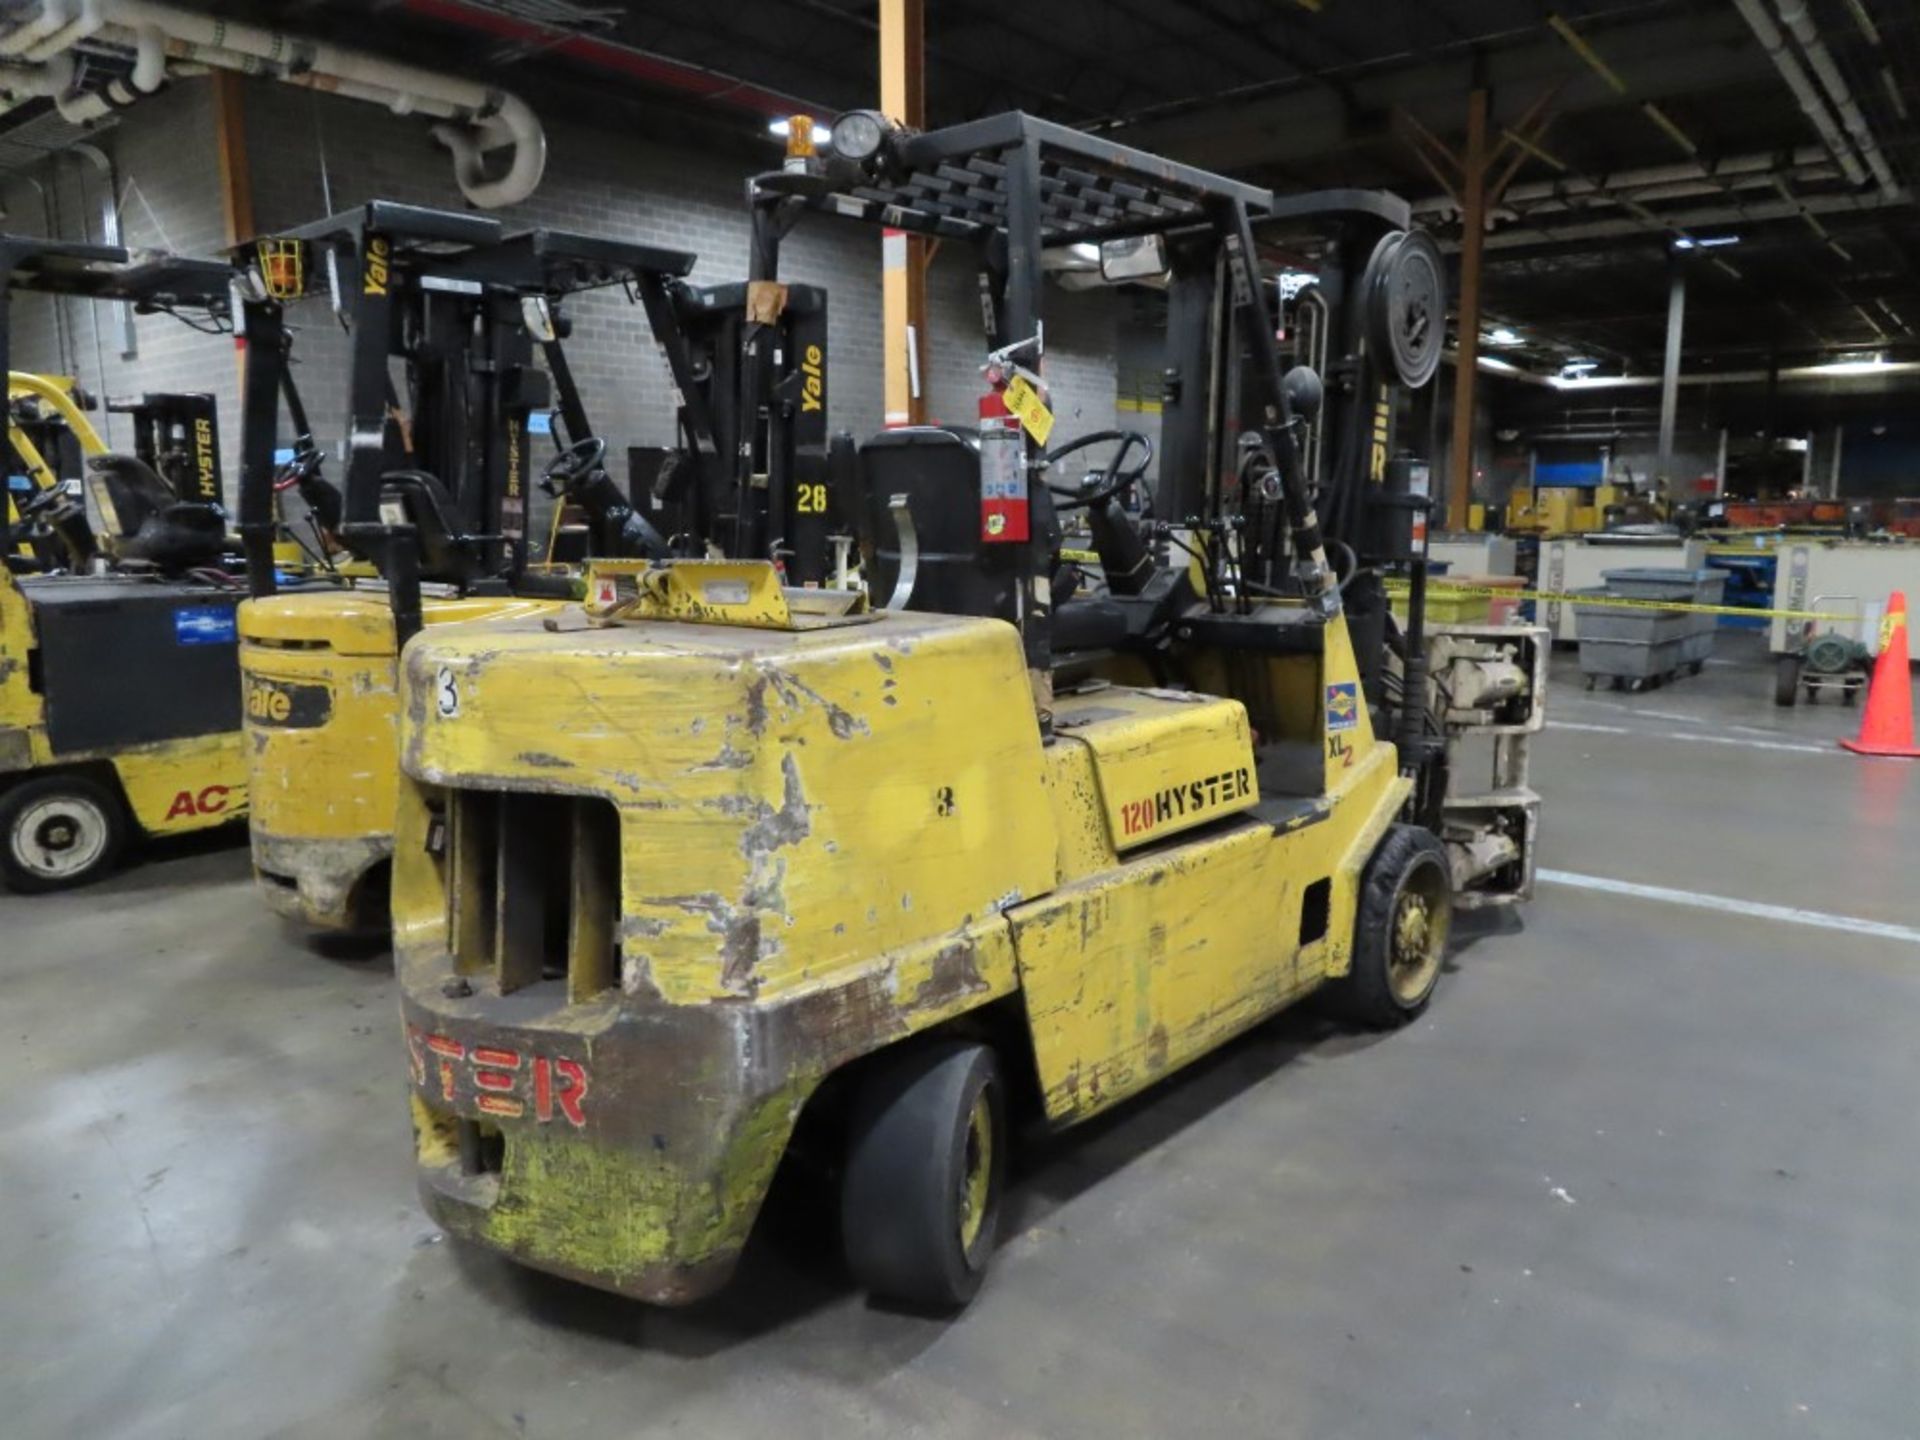 HYSTER MDL. 120XL2 APPROXIMATELY 7,900LB. CAPACITY PROPANE FORKLIFT TRUCK - Image 3 of 4